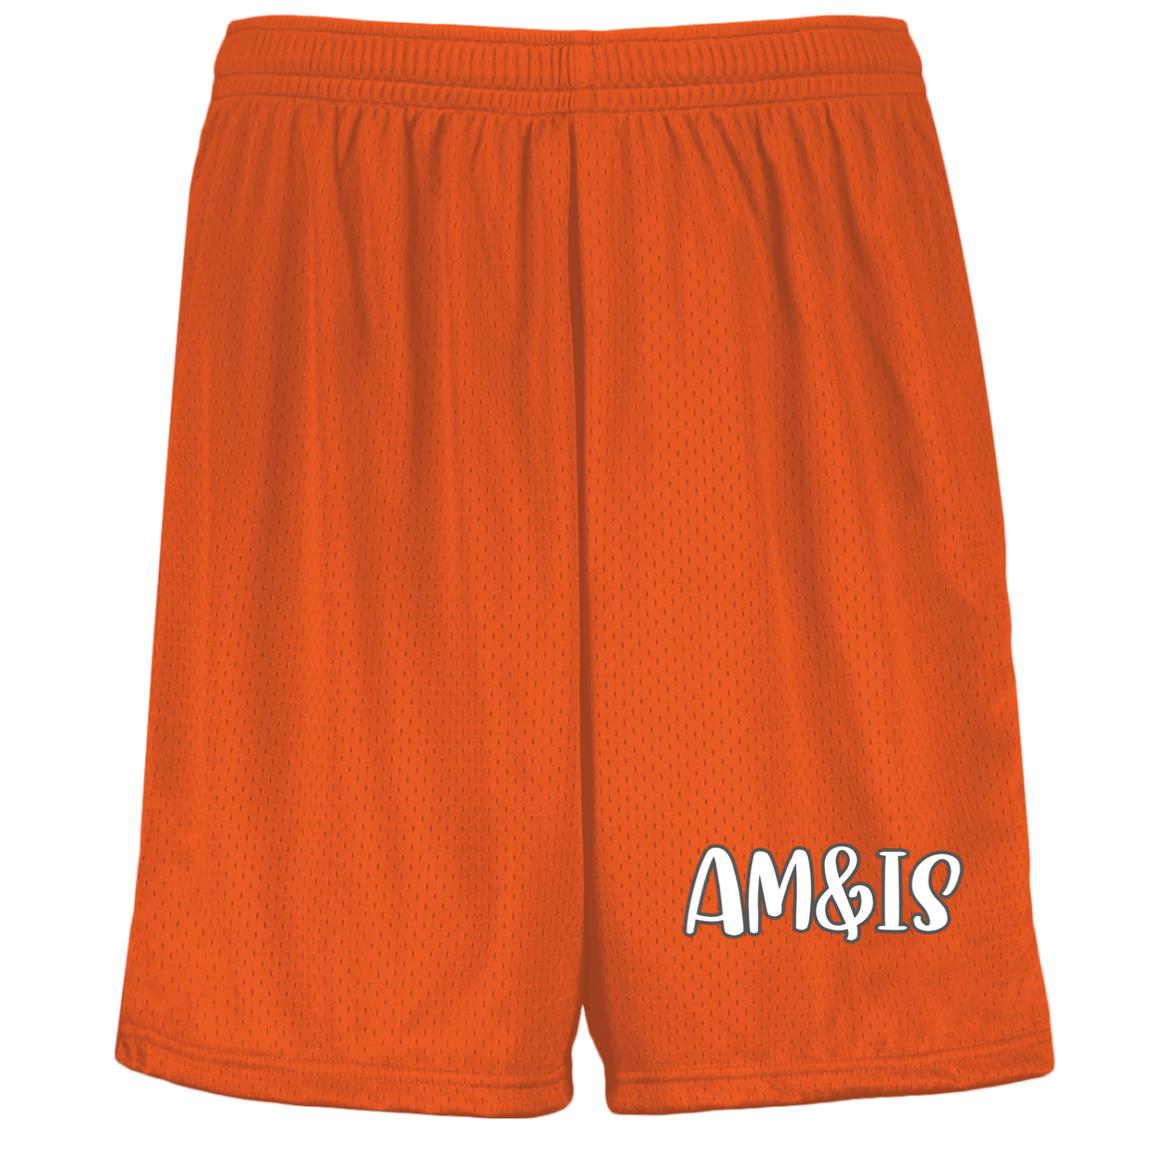 ORANGE AM&IS Youth Moisture-Wicking Mesh Shorts - kid's shorts at TFC&H Co.